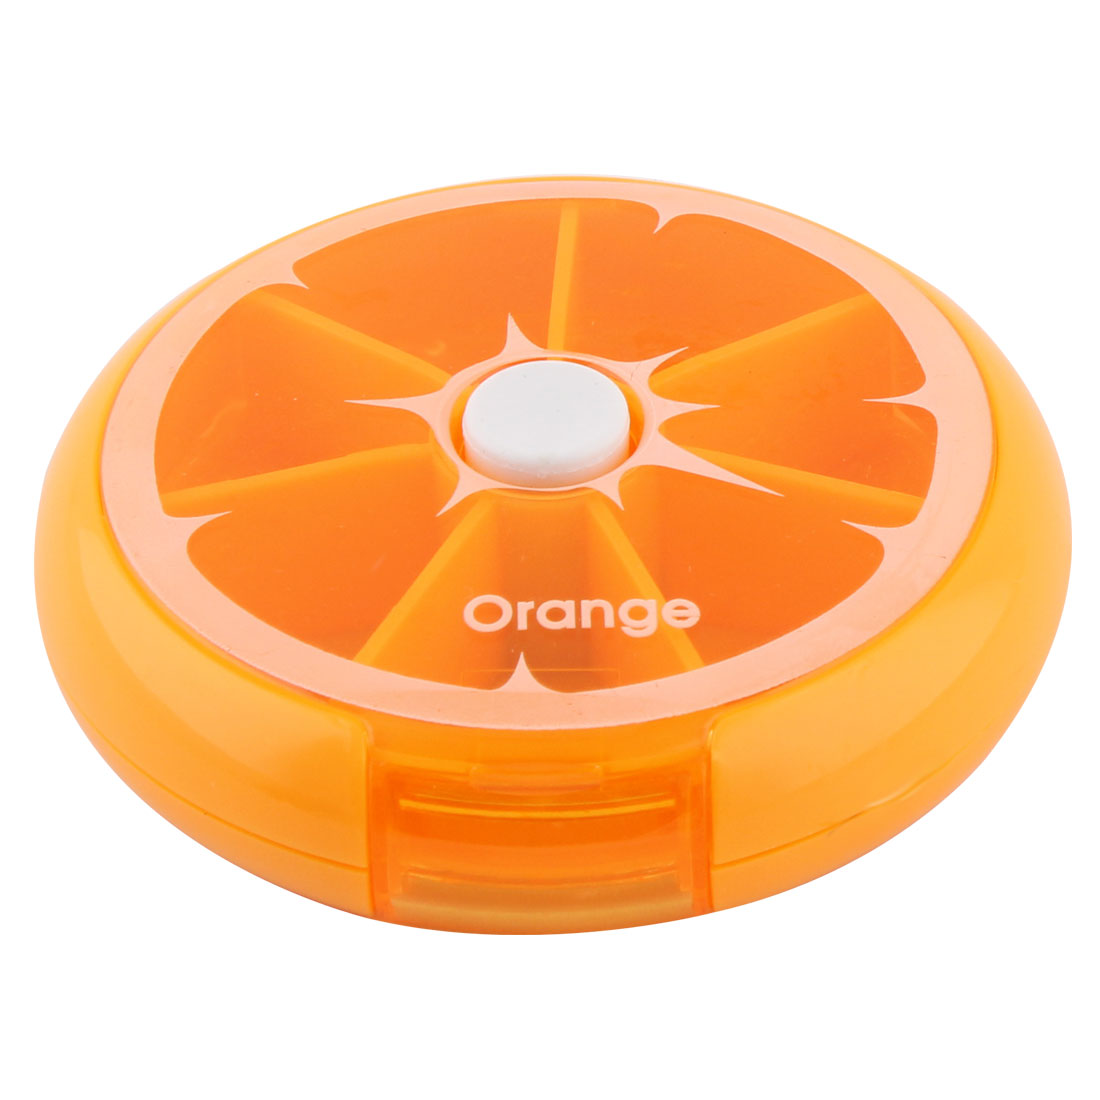 uxcell Uxcell Household Cute Fruit Style Button Rotate Weekly Pill Box Case Orange